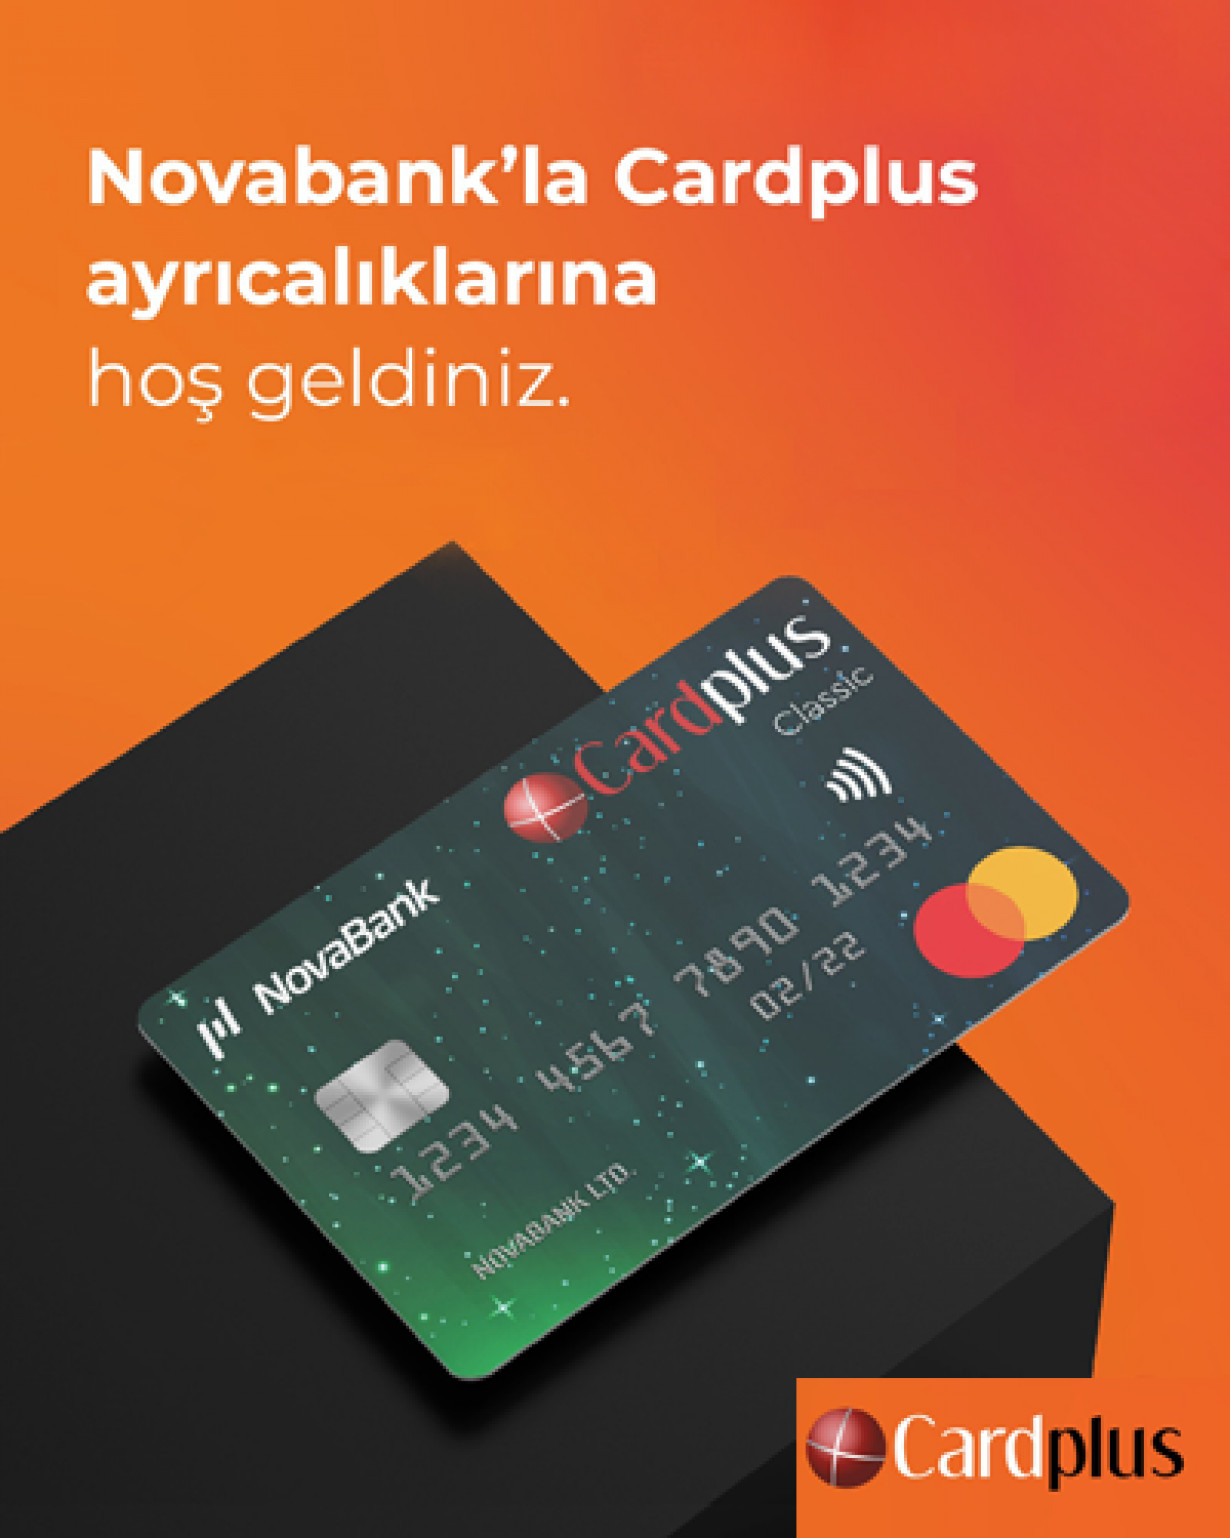 Welcome to Cardplus opportunities with Novabank!